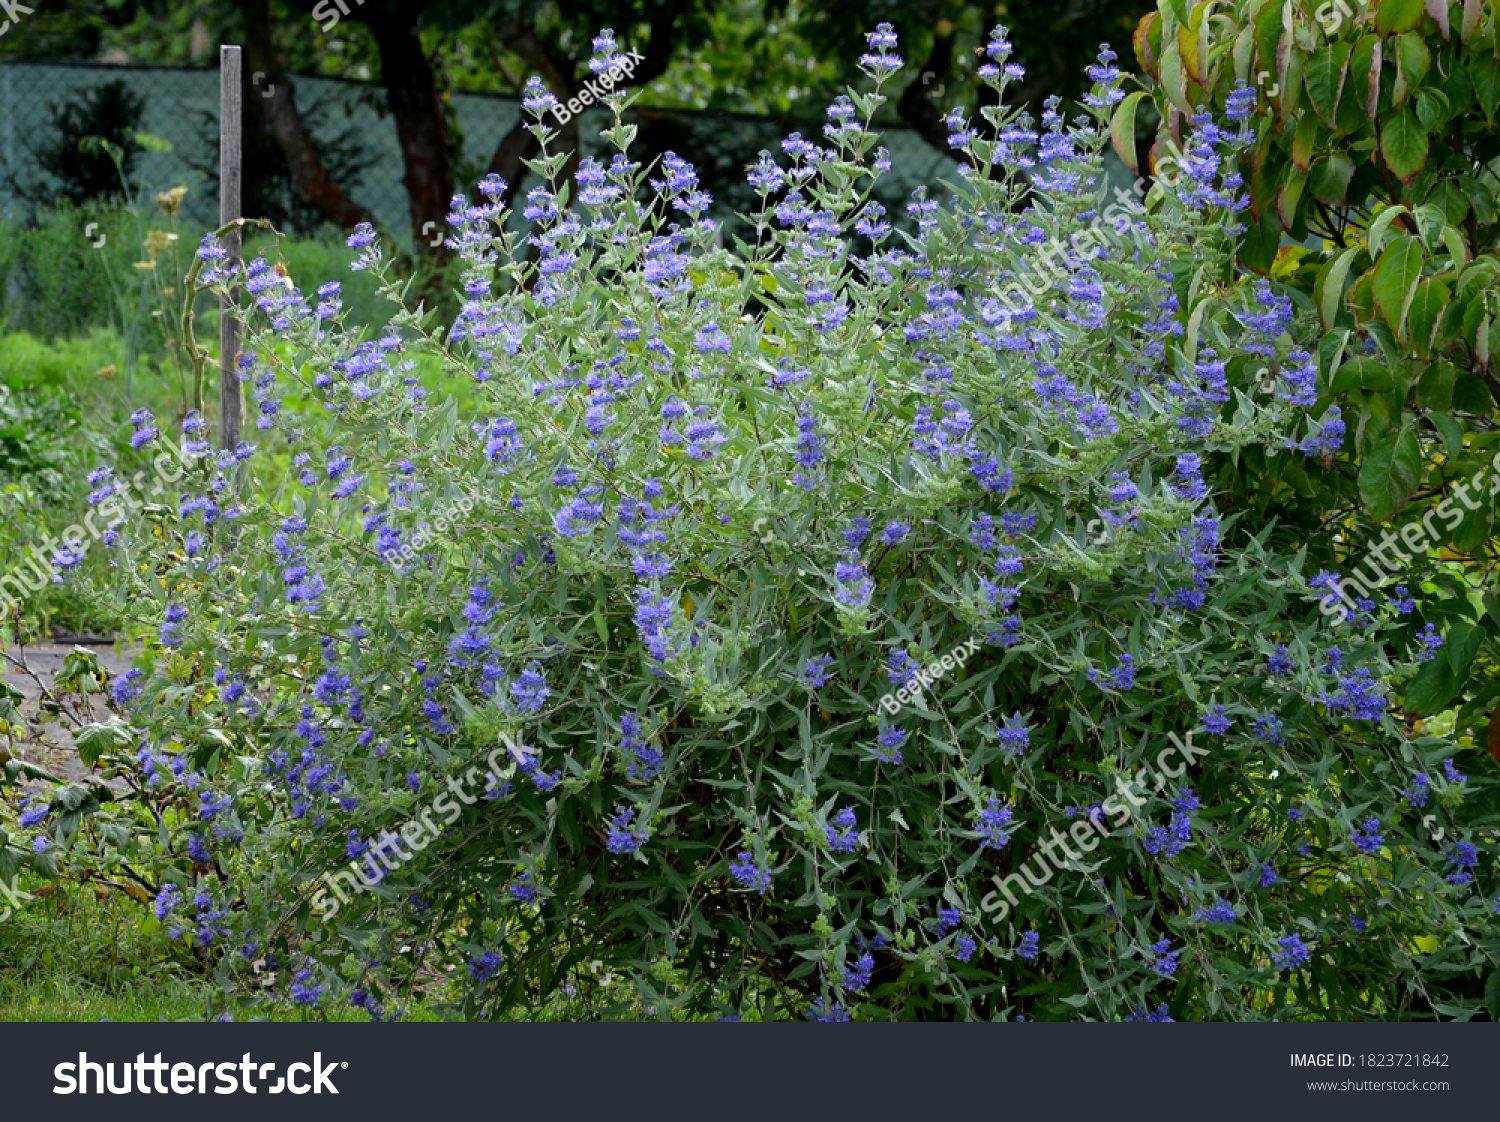 It is a lower woody shrub that offers late summer flowering of deep blue-violet color. The Heavenly Blue variety bears almost silver leaves from below. The flowers are small, as if hairy laths of blue #1823721842